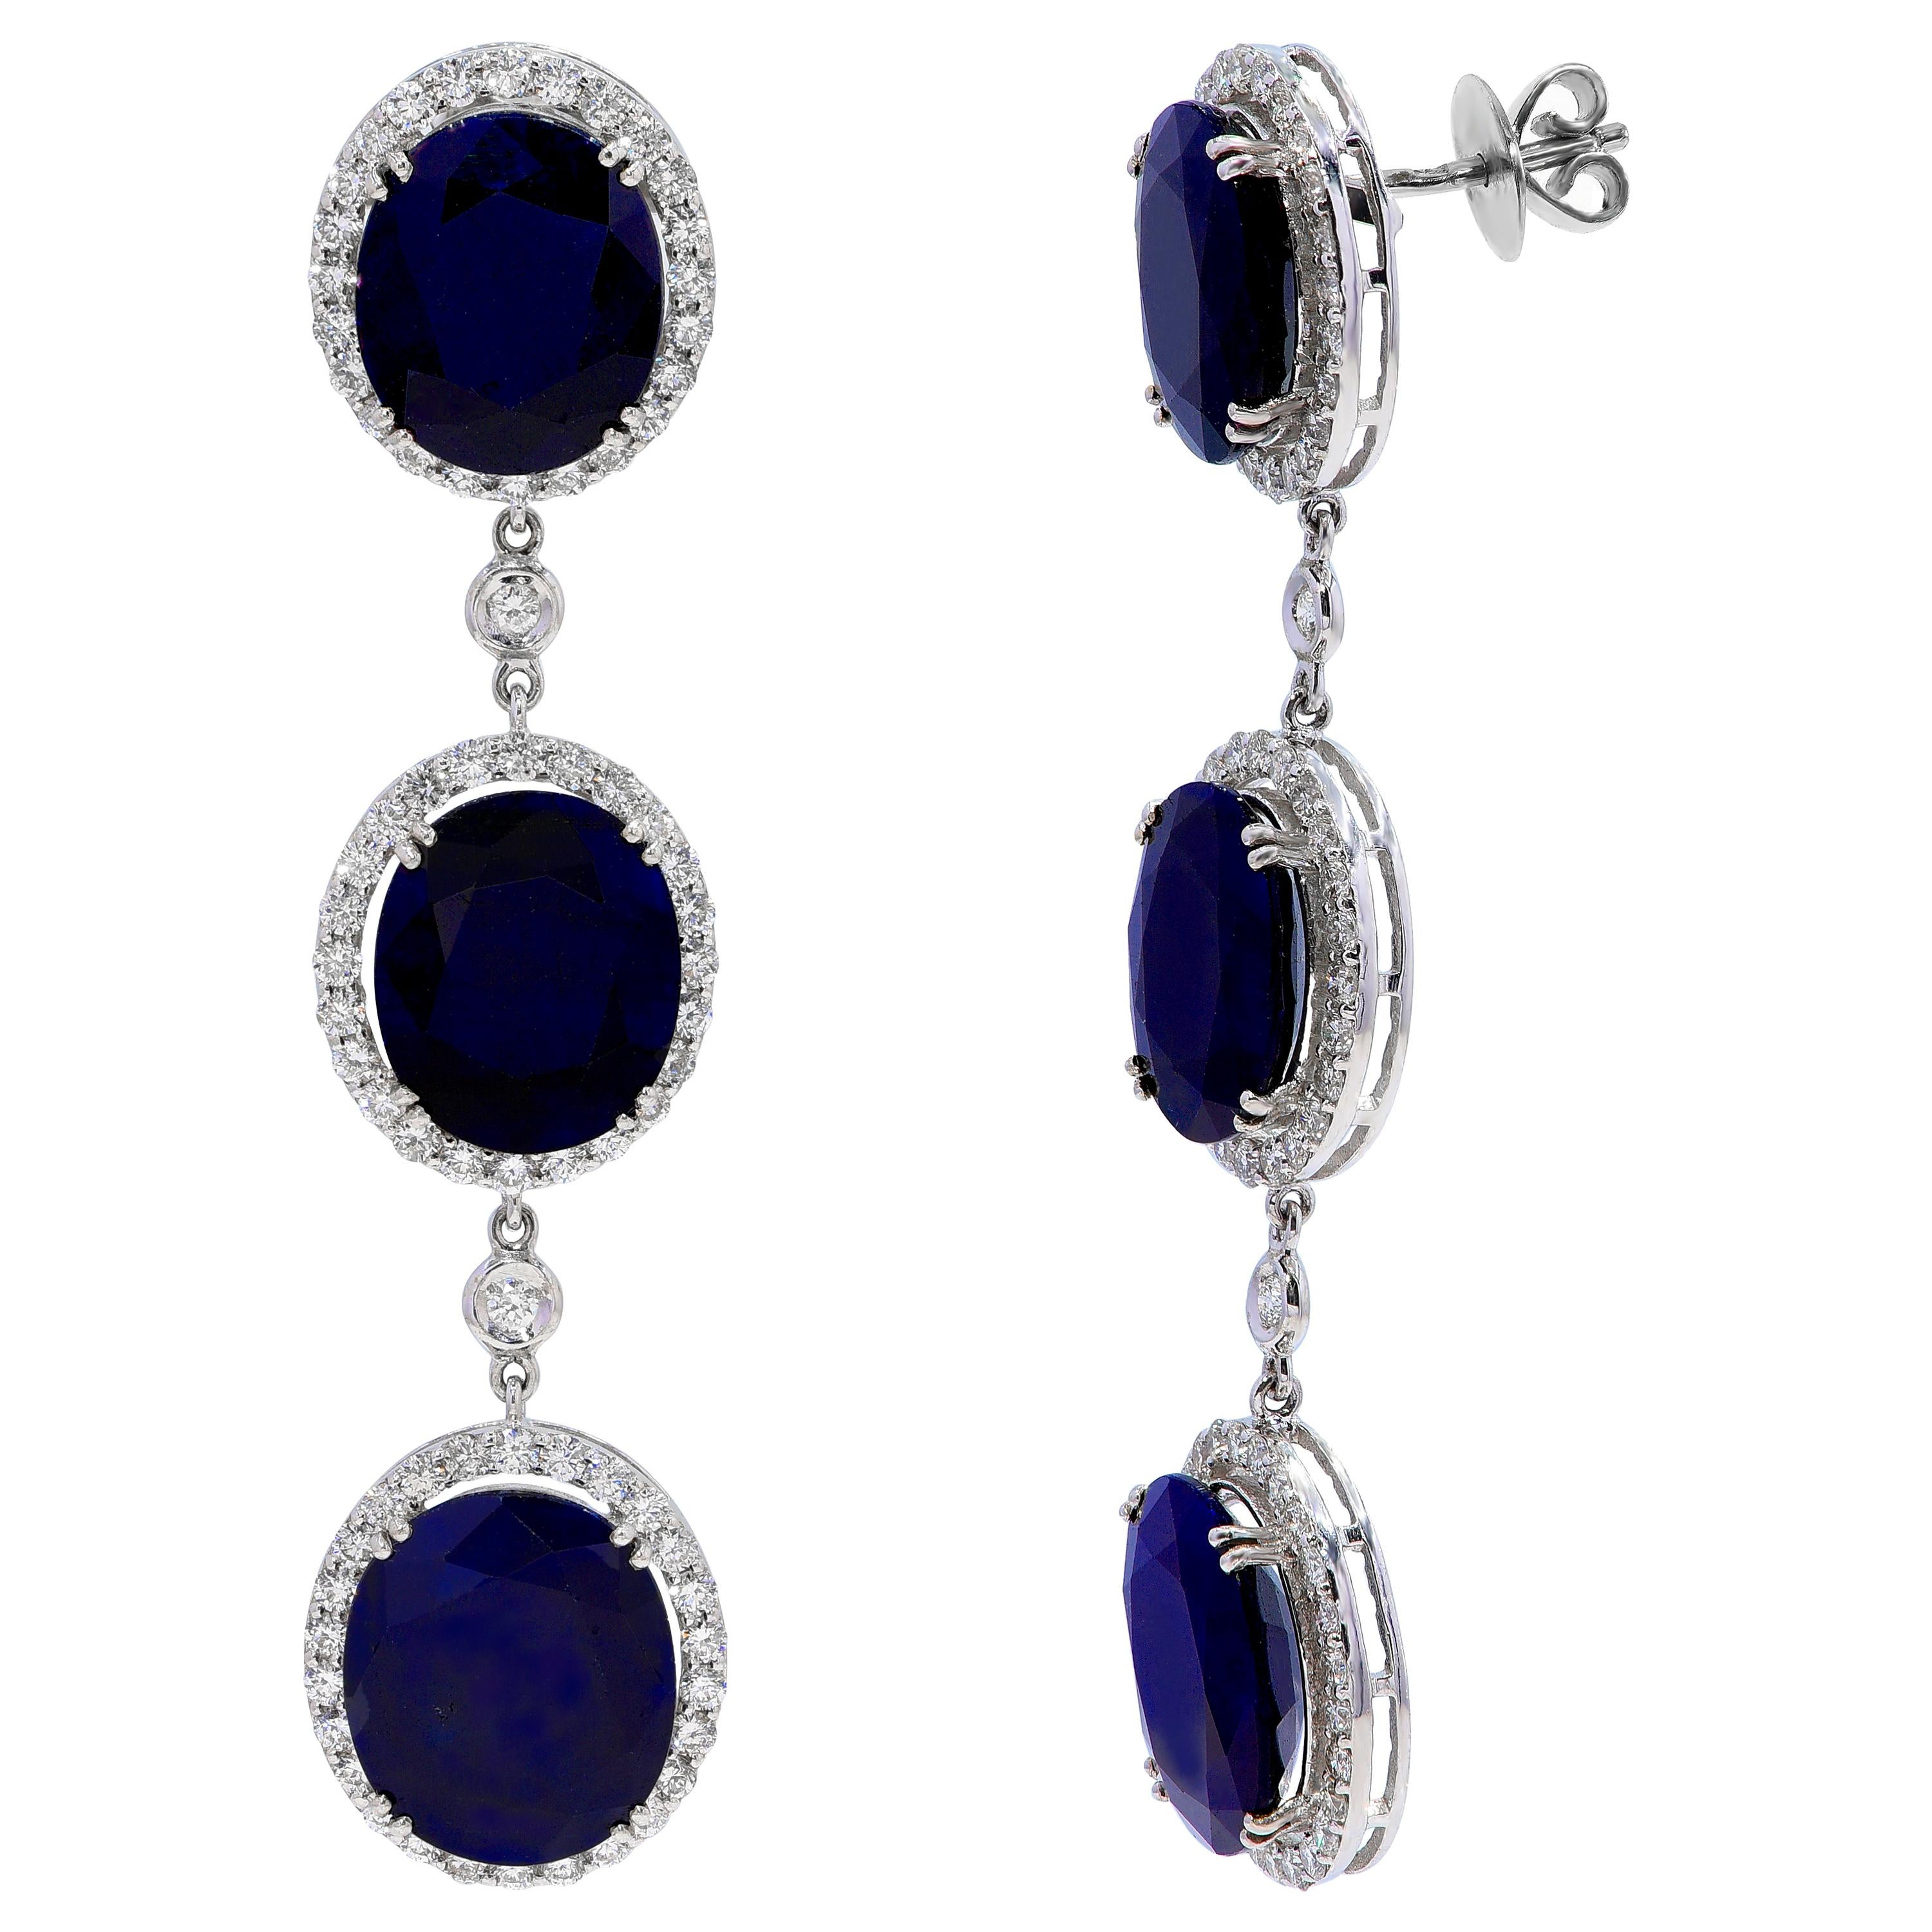 18kt White Gold Earrings 43.56ct Sapphire, 3.51ct Diamond For Sale